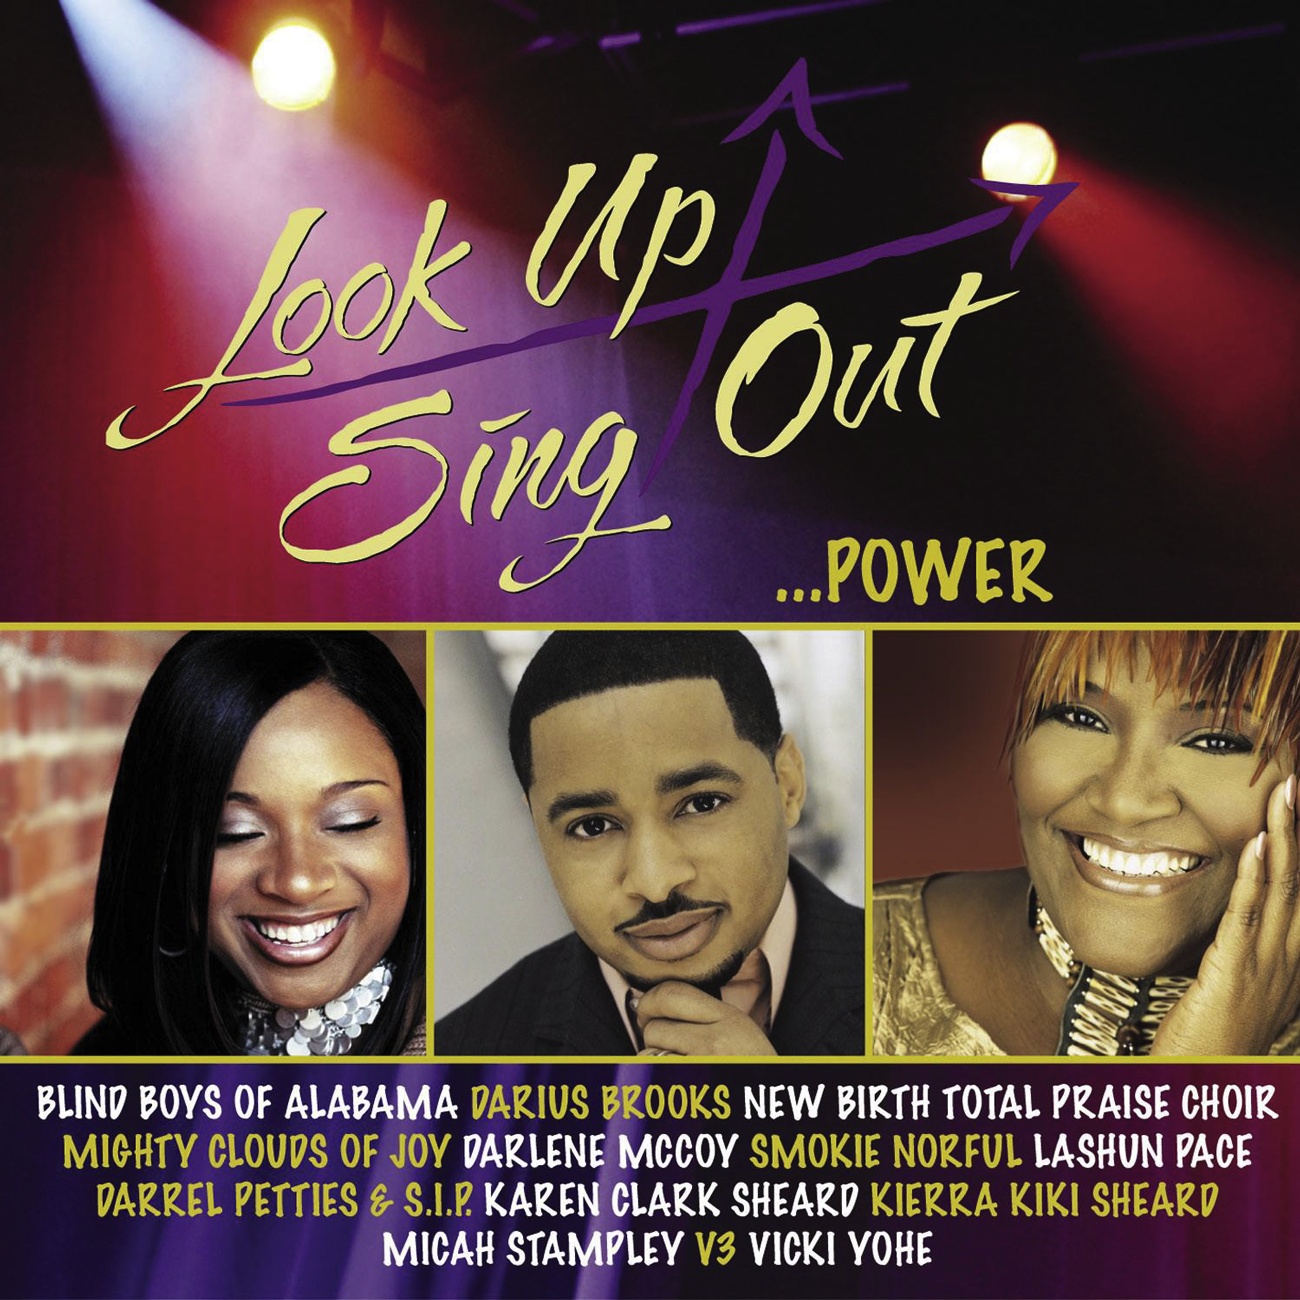 Suddenly (Feat. Vanessa Bell Armstrong)